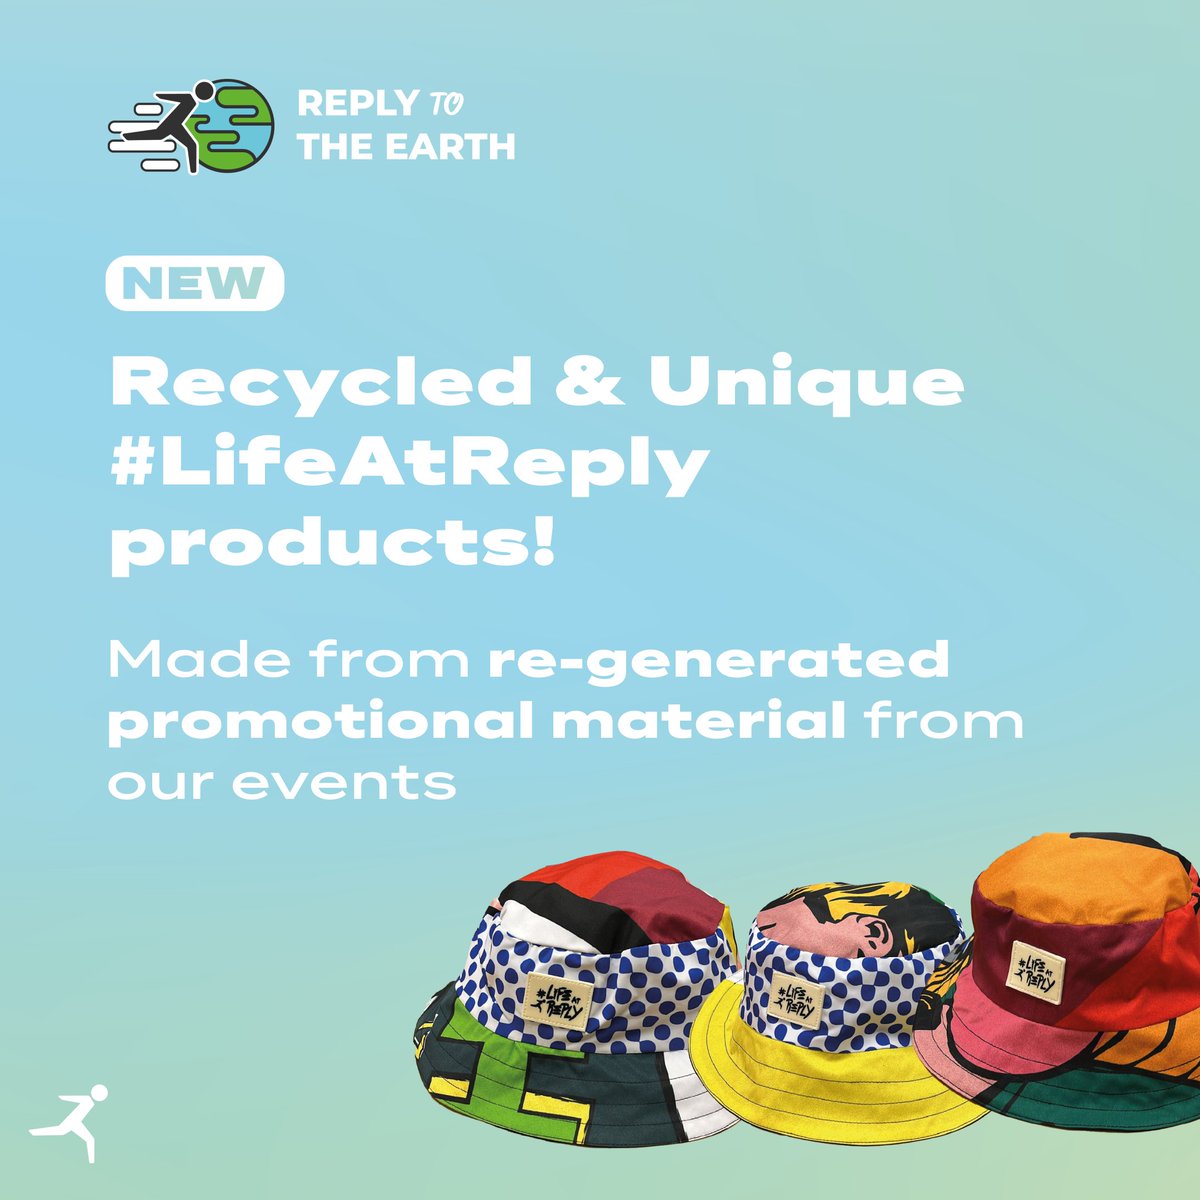 As part of #ReplyToTheEarth, our programme designed to raise awareness on #sustainability inside and outside Reply, we are proud and happy to present our new #LifeAtReply recycled products, made from re-generated promotional materials from our events! ♻️🌎 Each product is truly